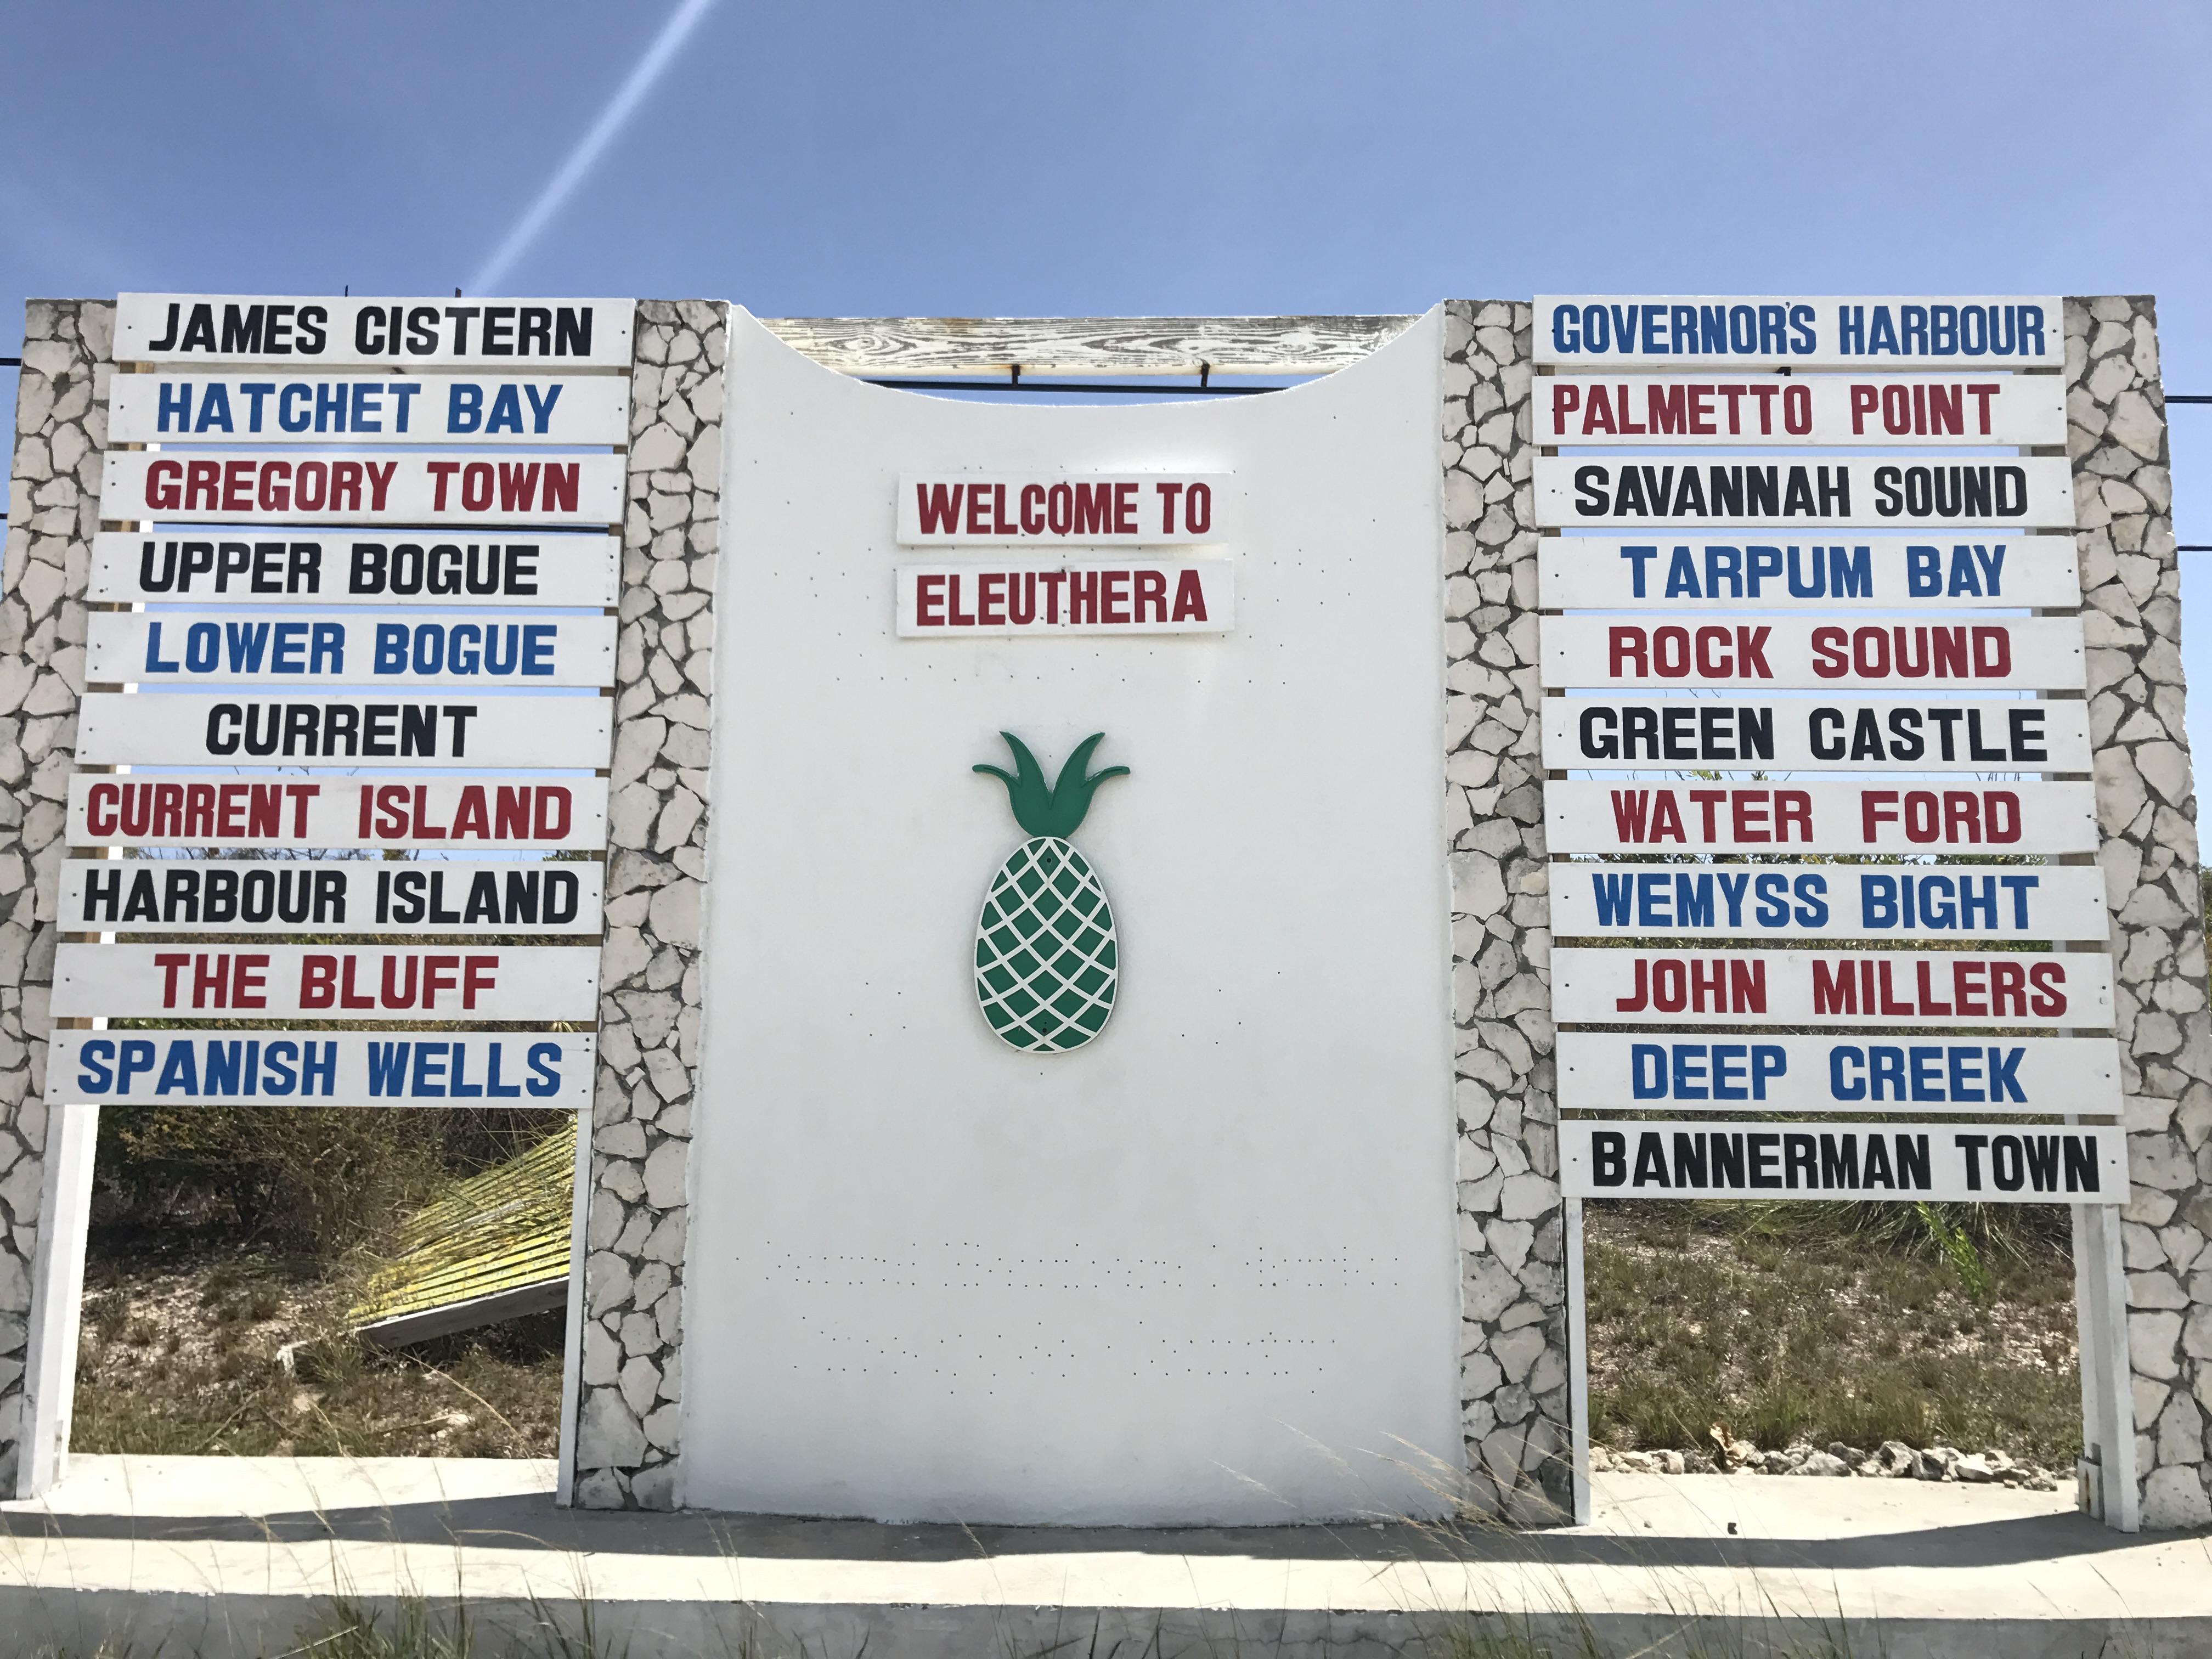 Tips for a 3 day trip to Eleuthera